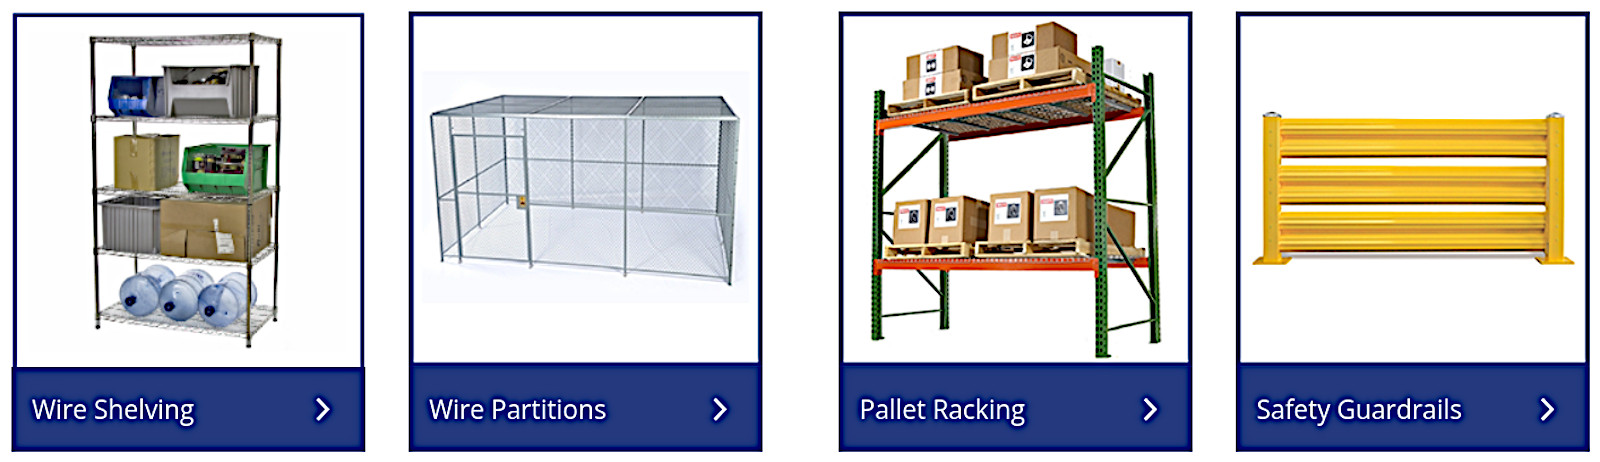 shelves shelving systems discounted